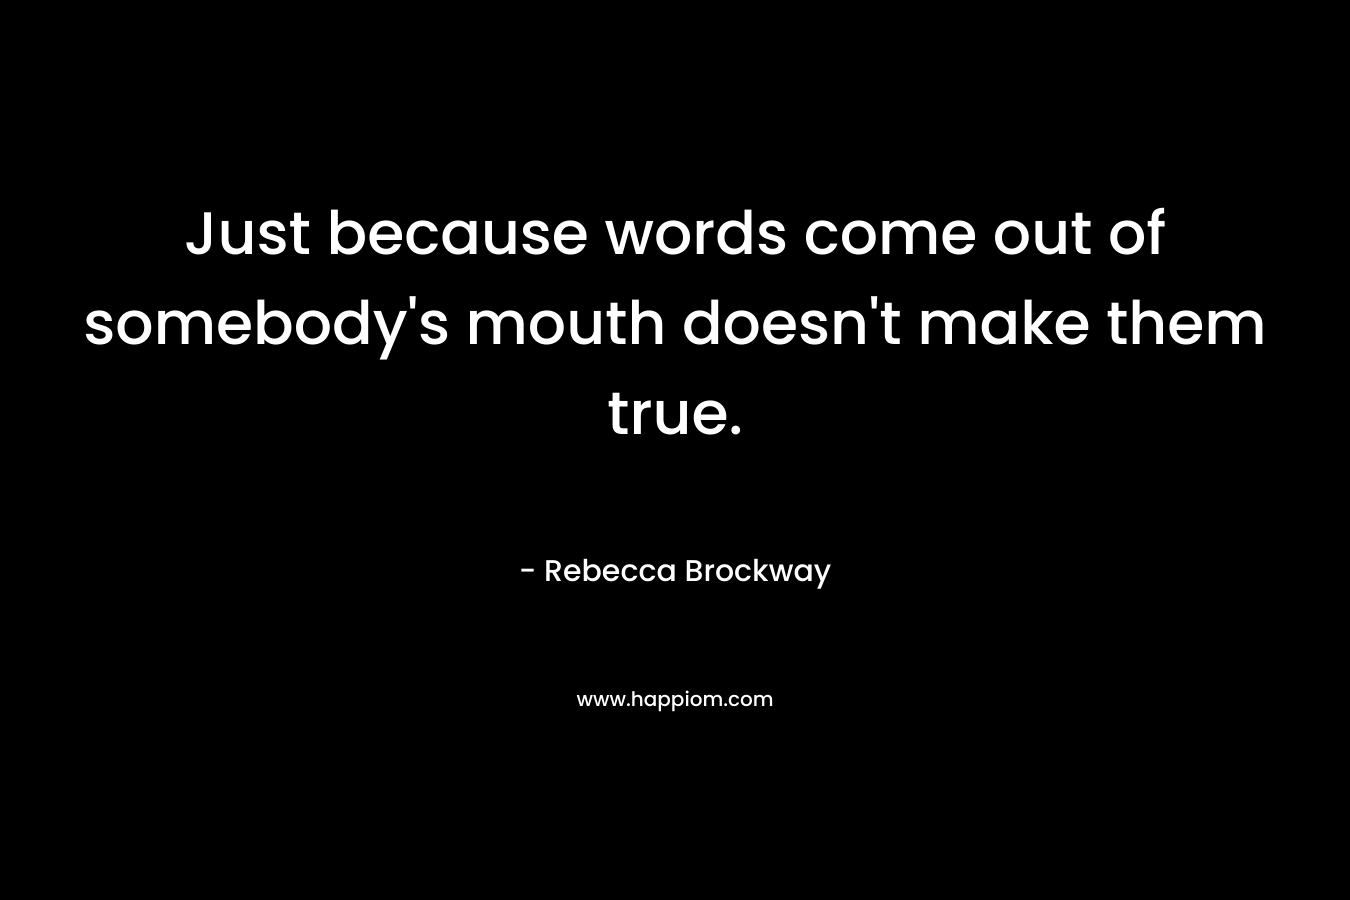 Just because words come out of somebody's mouth doesn't make them true.